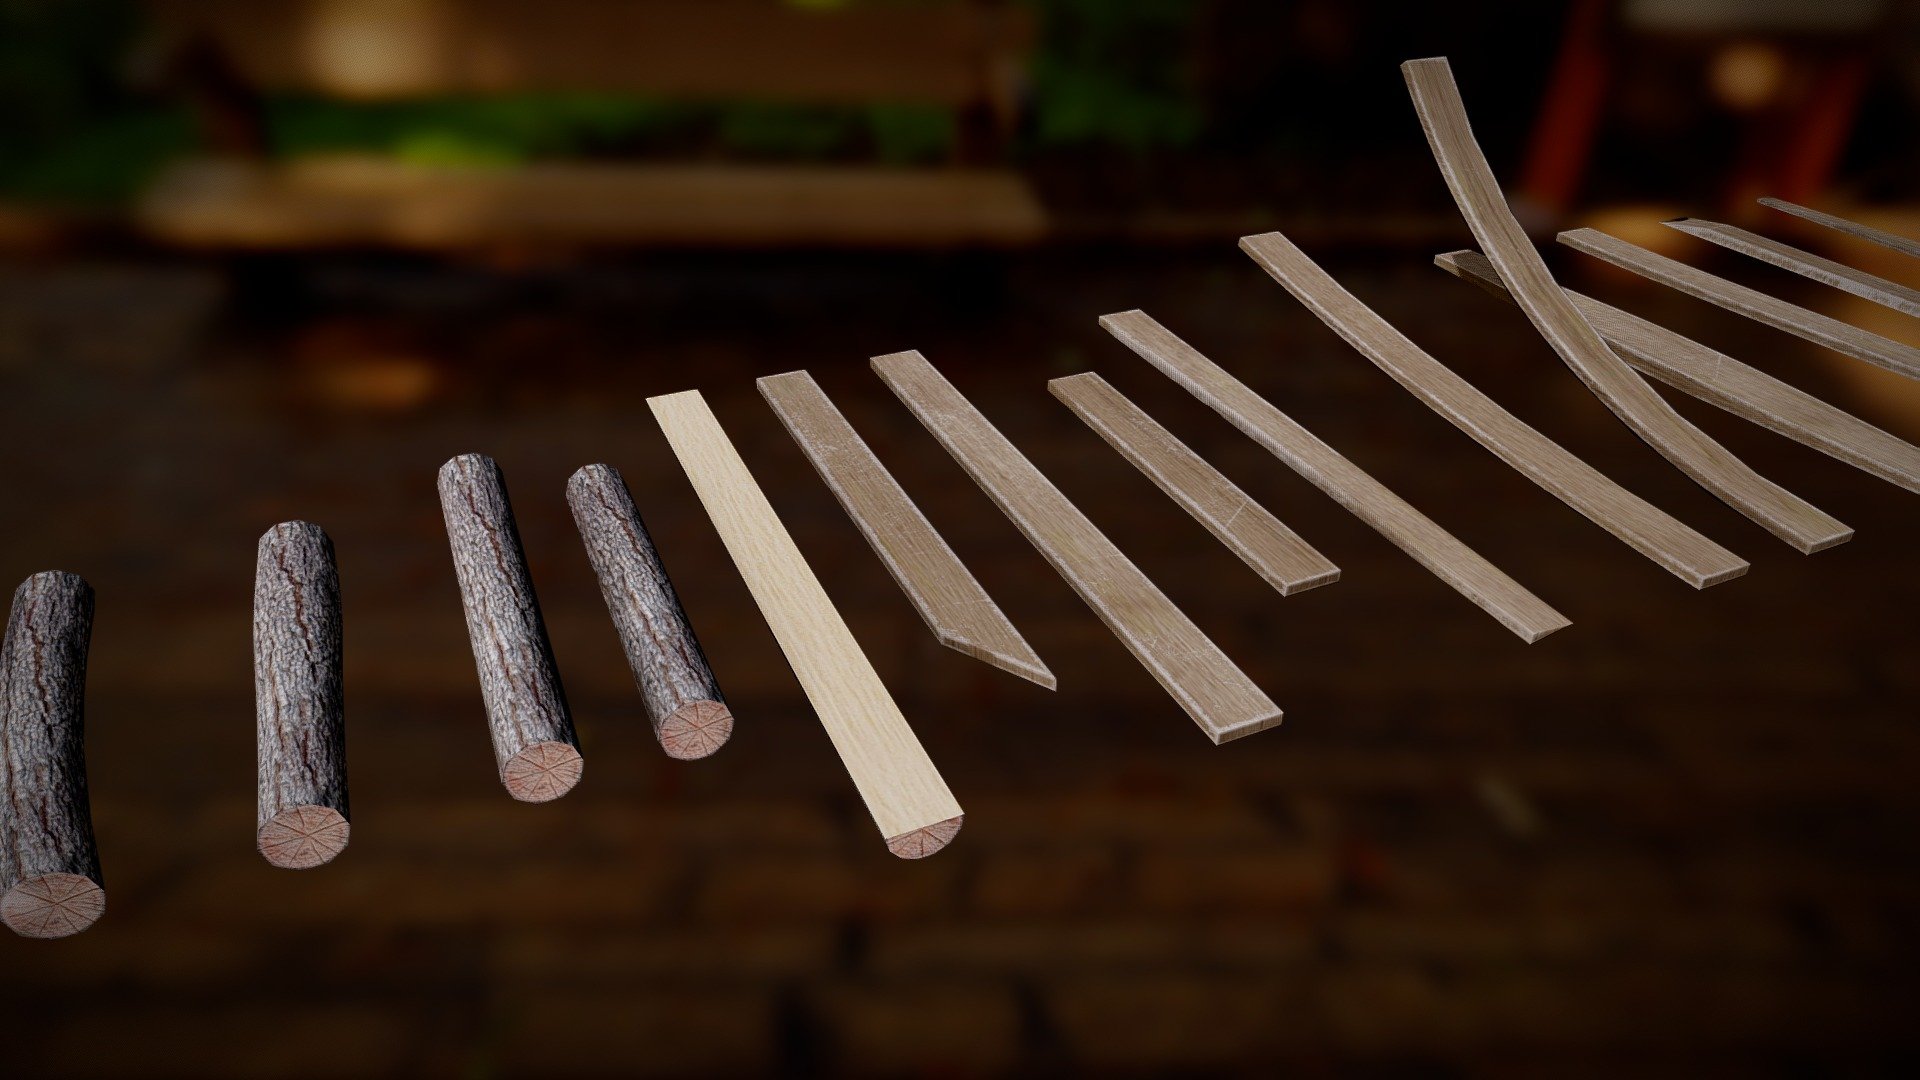 Just some handy dandy bits of wood and logs for a game 3d model